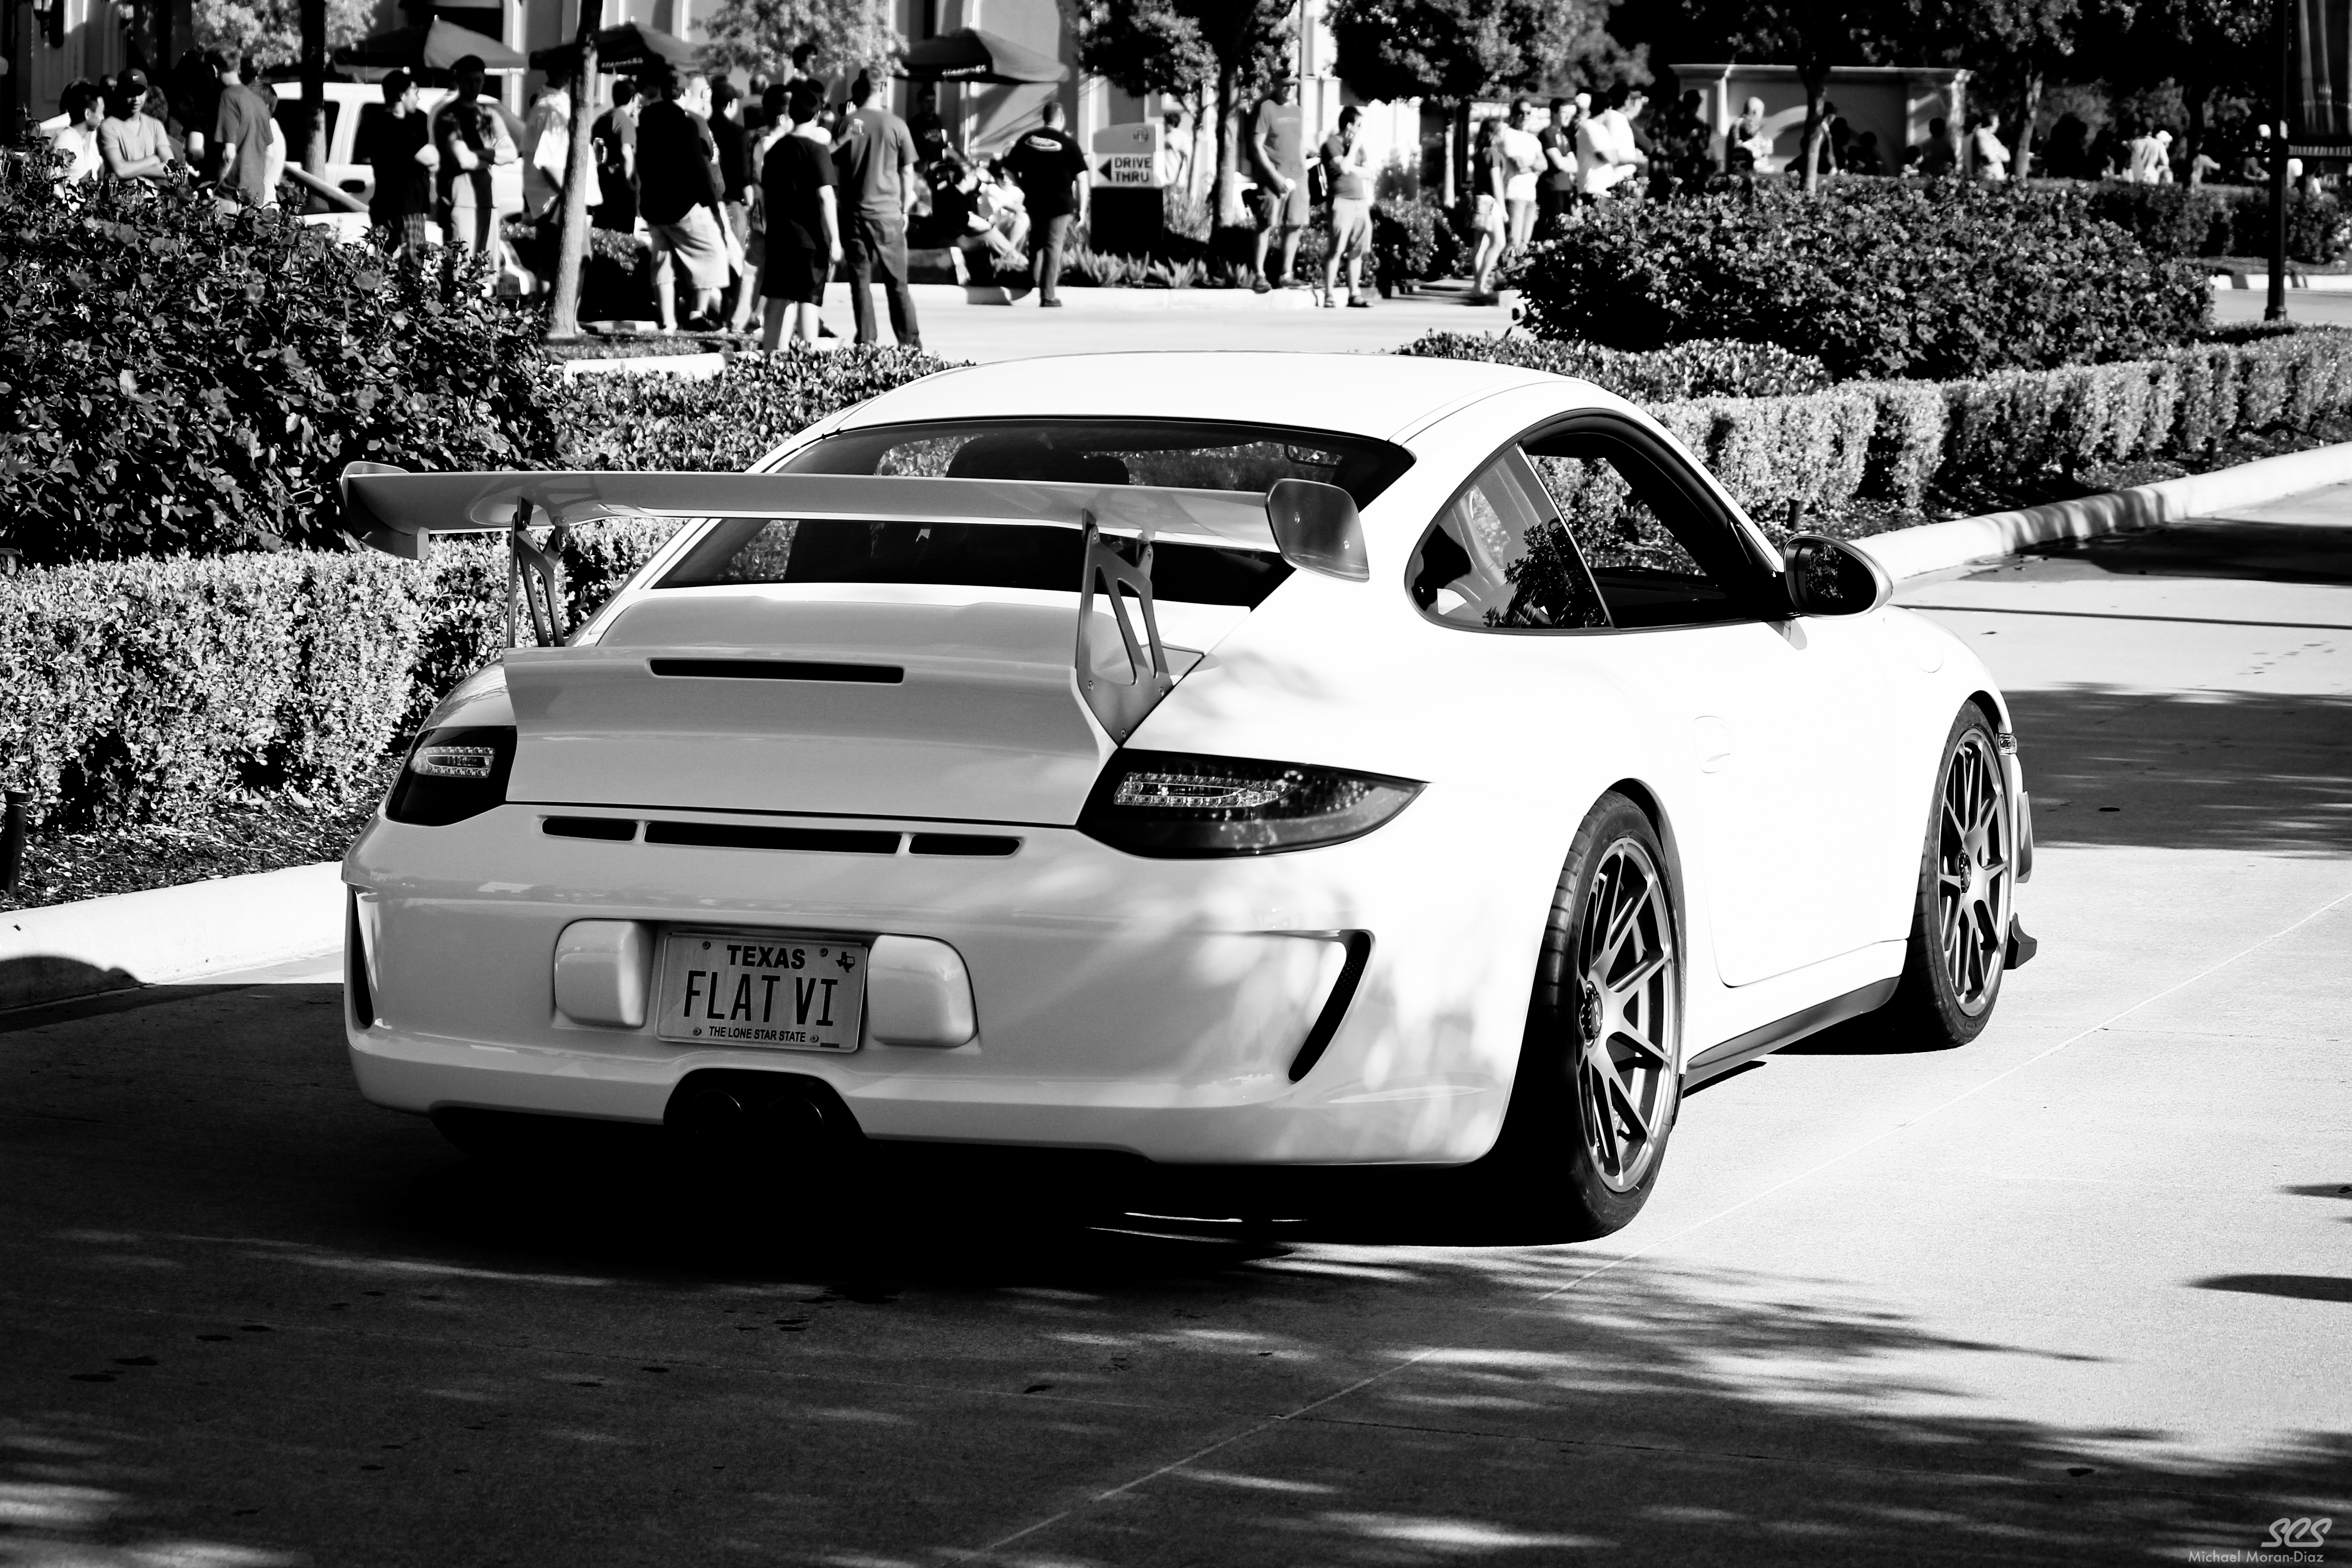 997 GT3 RS (white and no decals) with Texas license plate FLAT VI